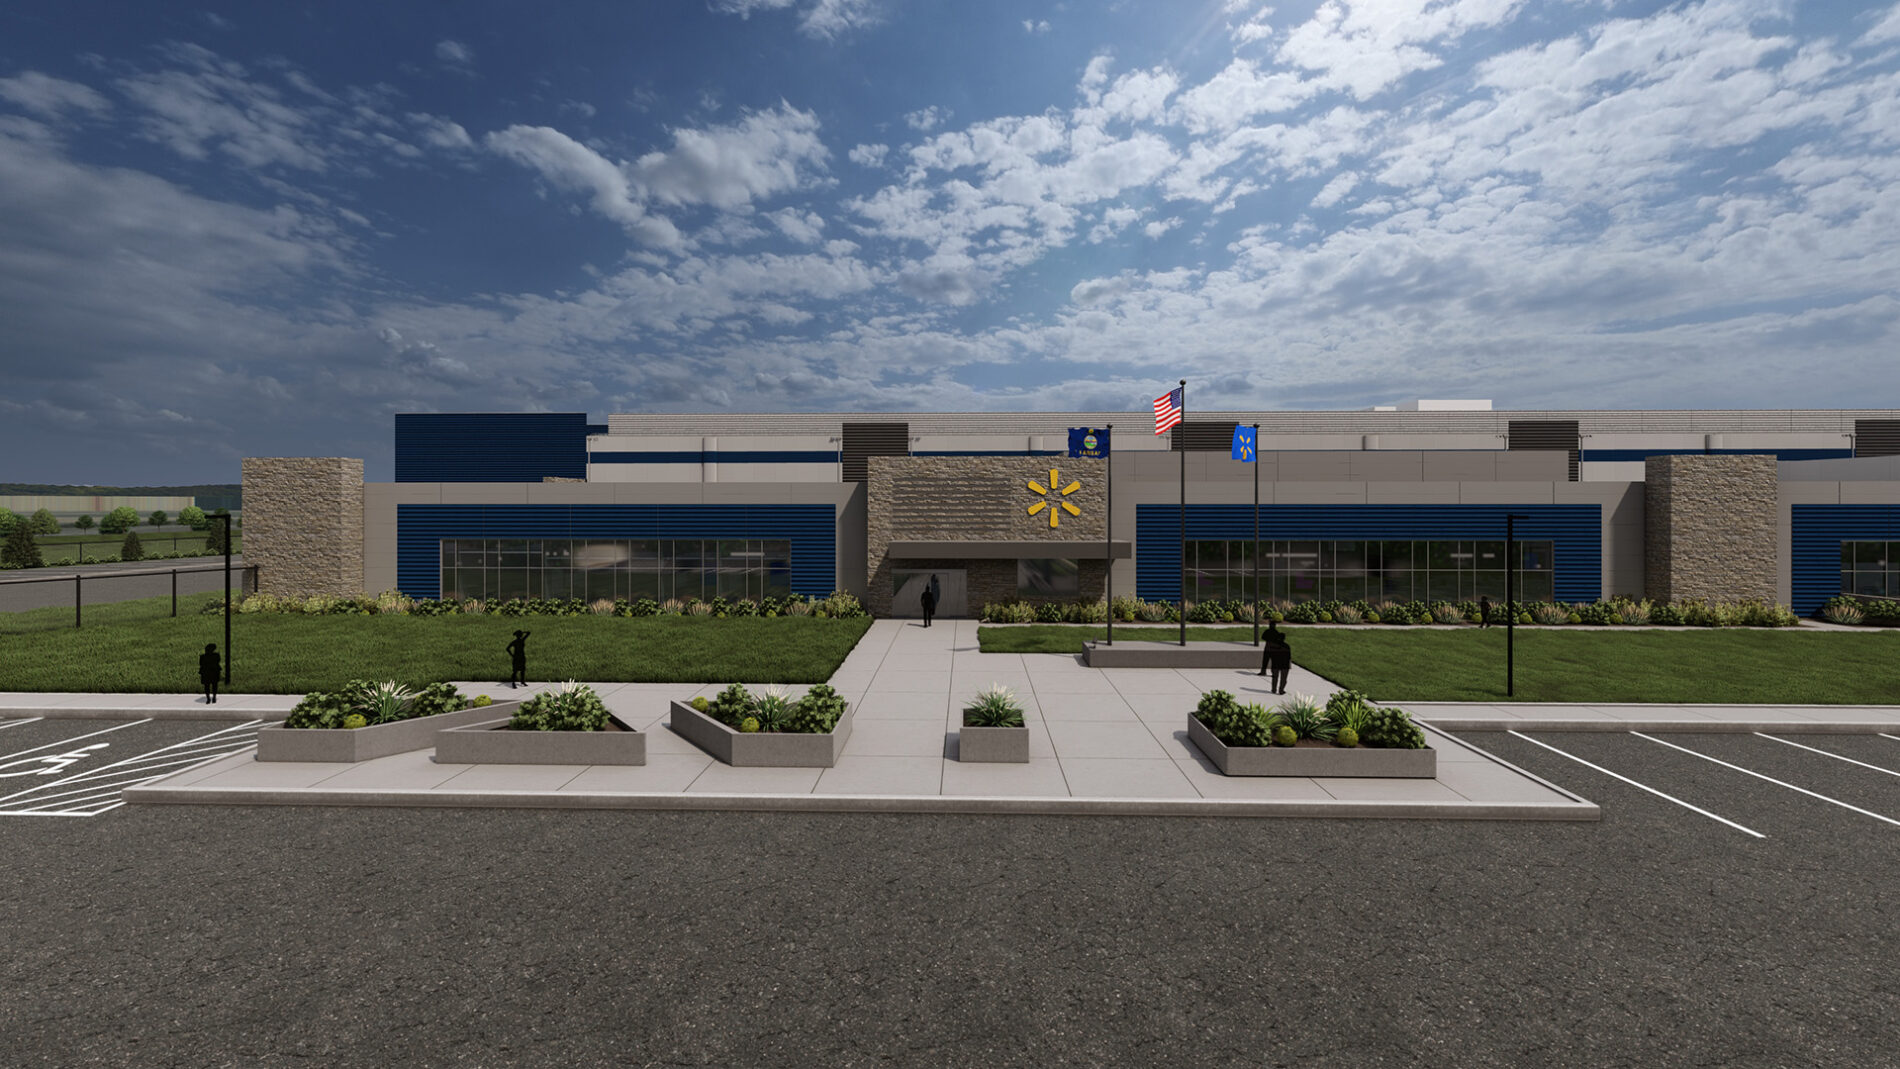 A rendering of a 330,000 square foot beef processing facility being designed and built by McCownGordon